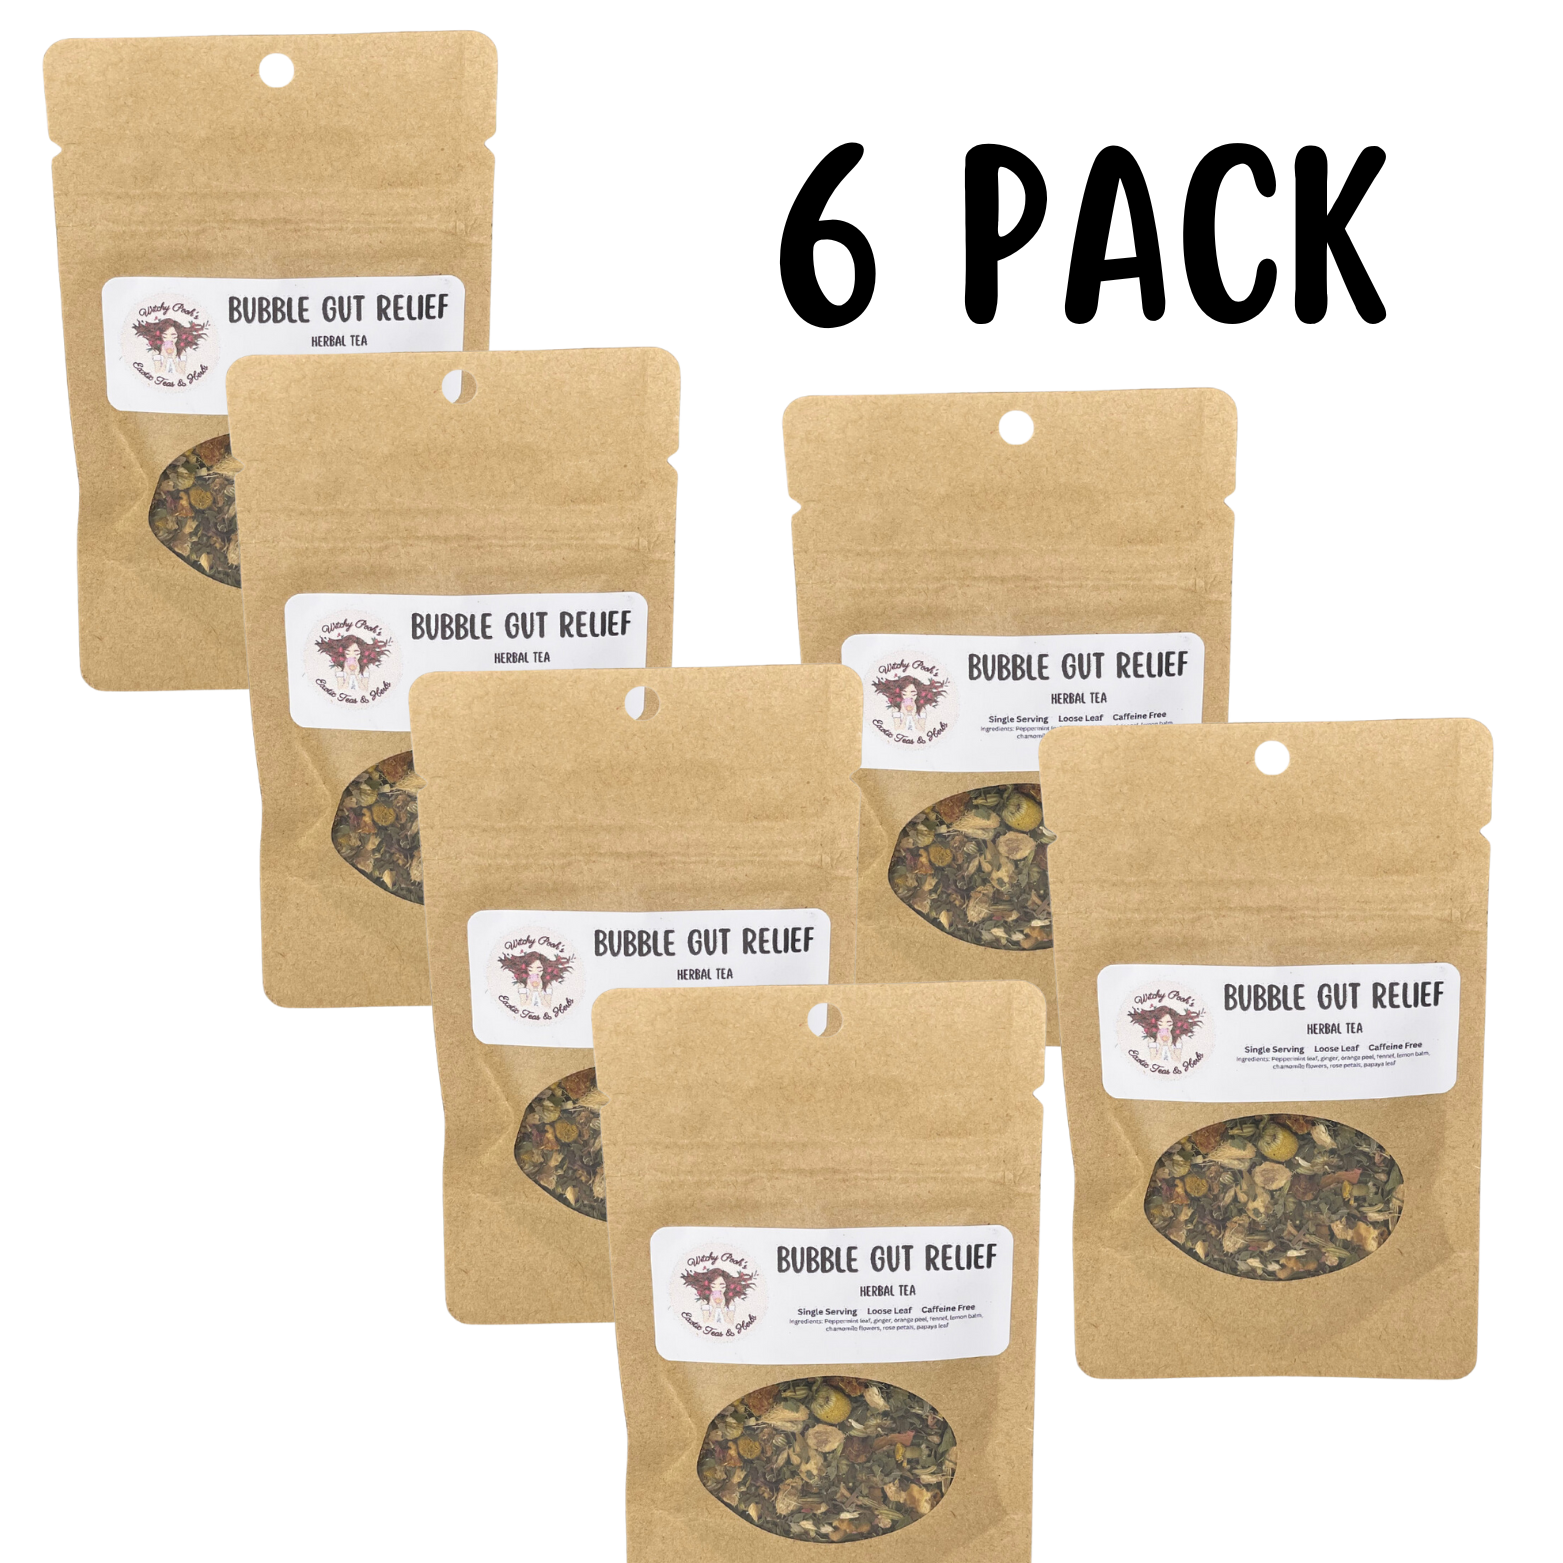 Witchy Pooh's Bubble Gut Relief Loose Leaf Herbal Functional Tea, Caffeine Free, For Digestive Issues-14